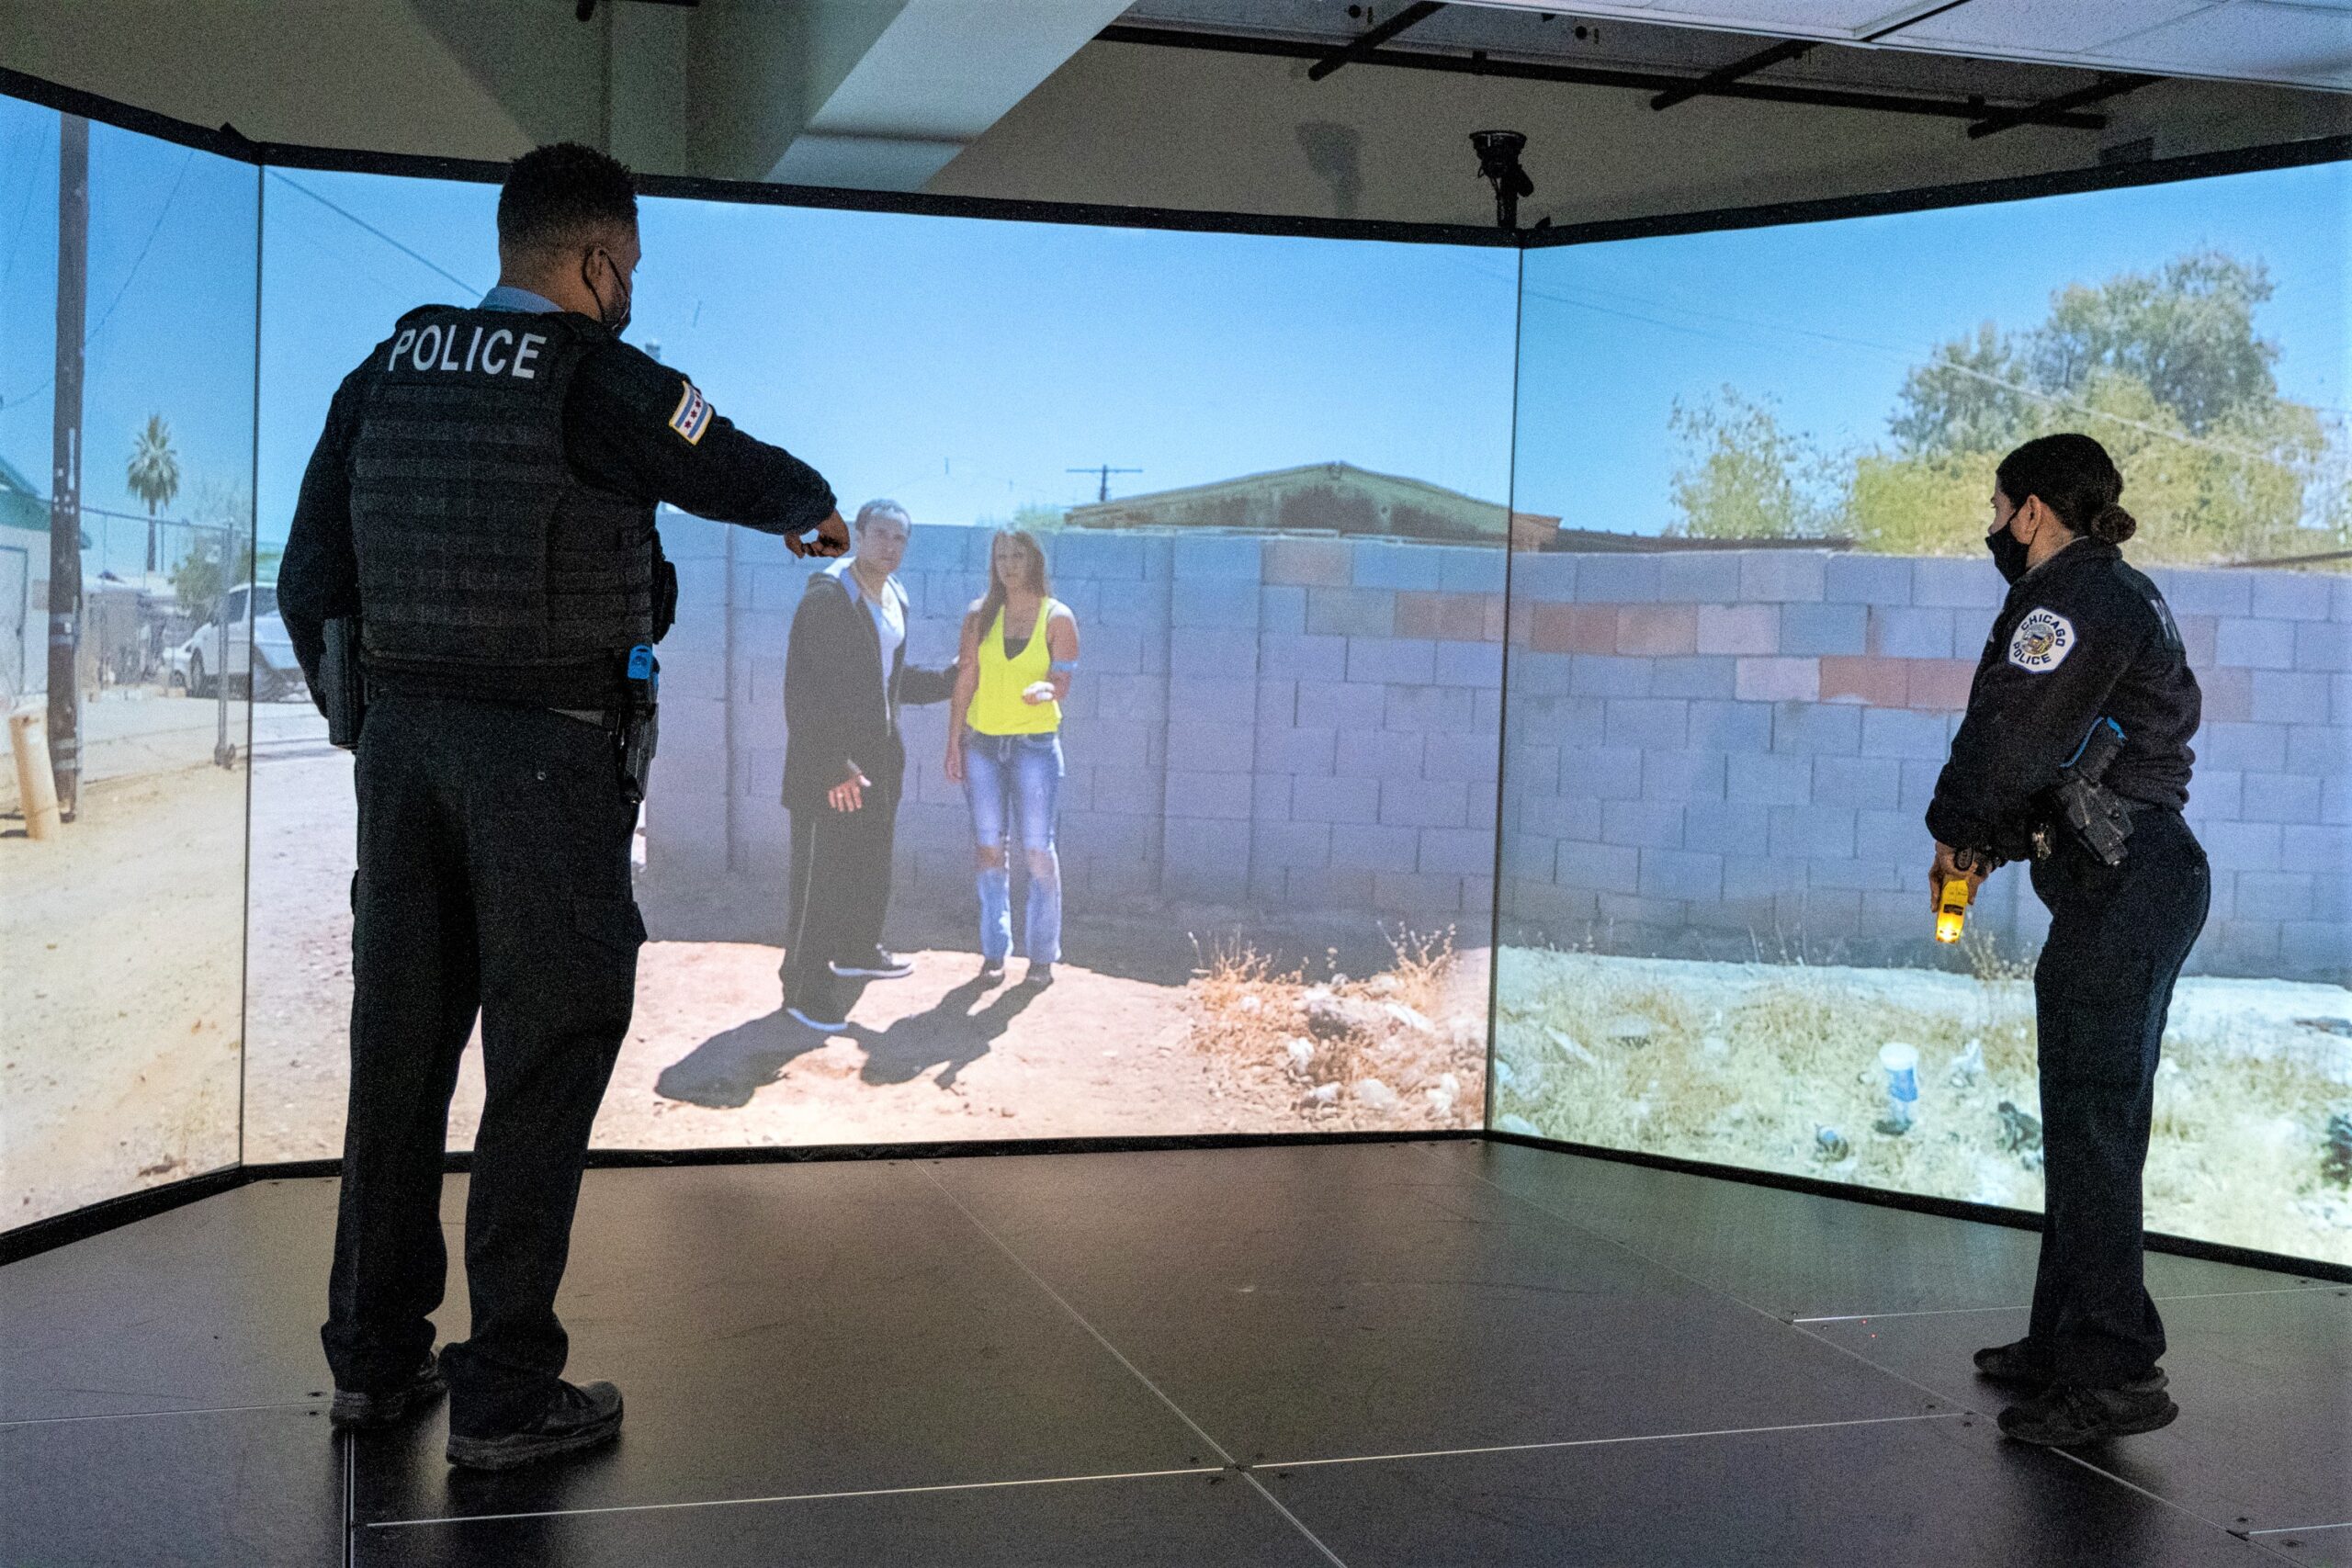 Police Officers training in front of a virtual simulator